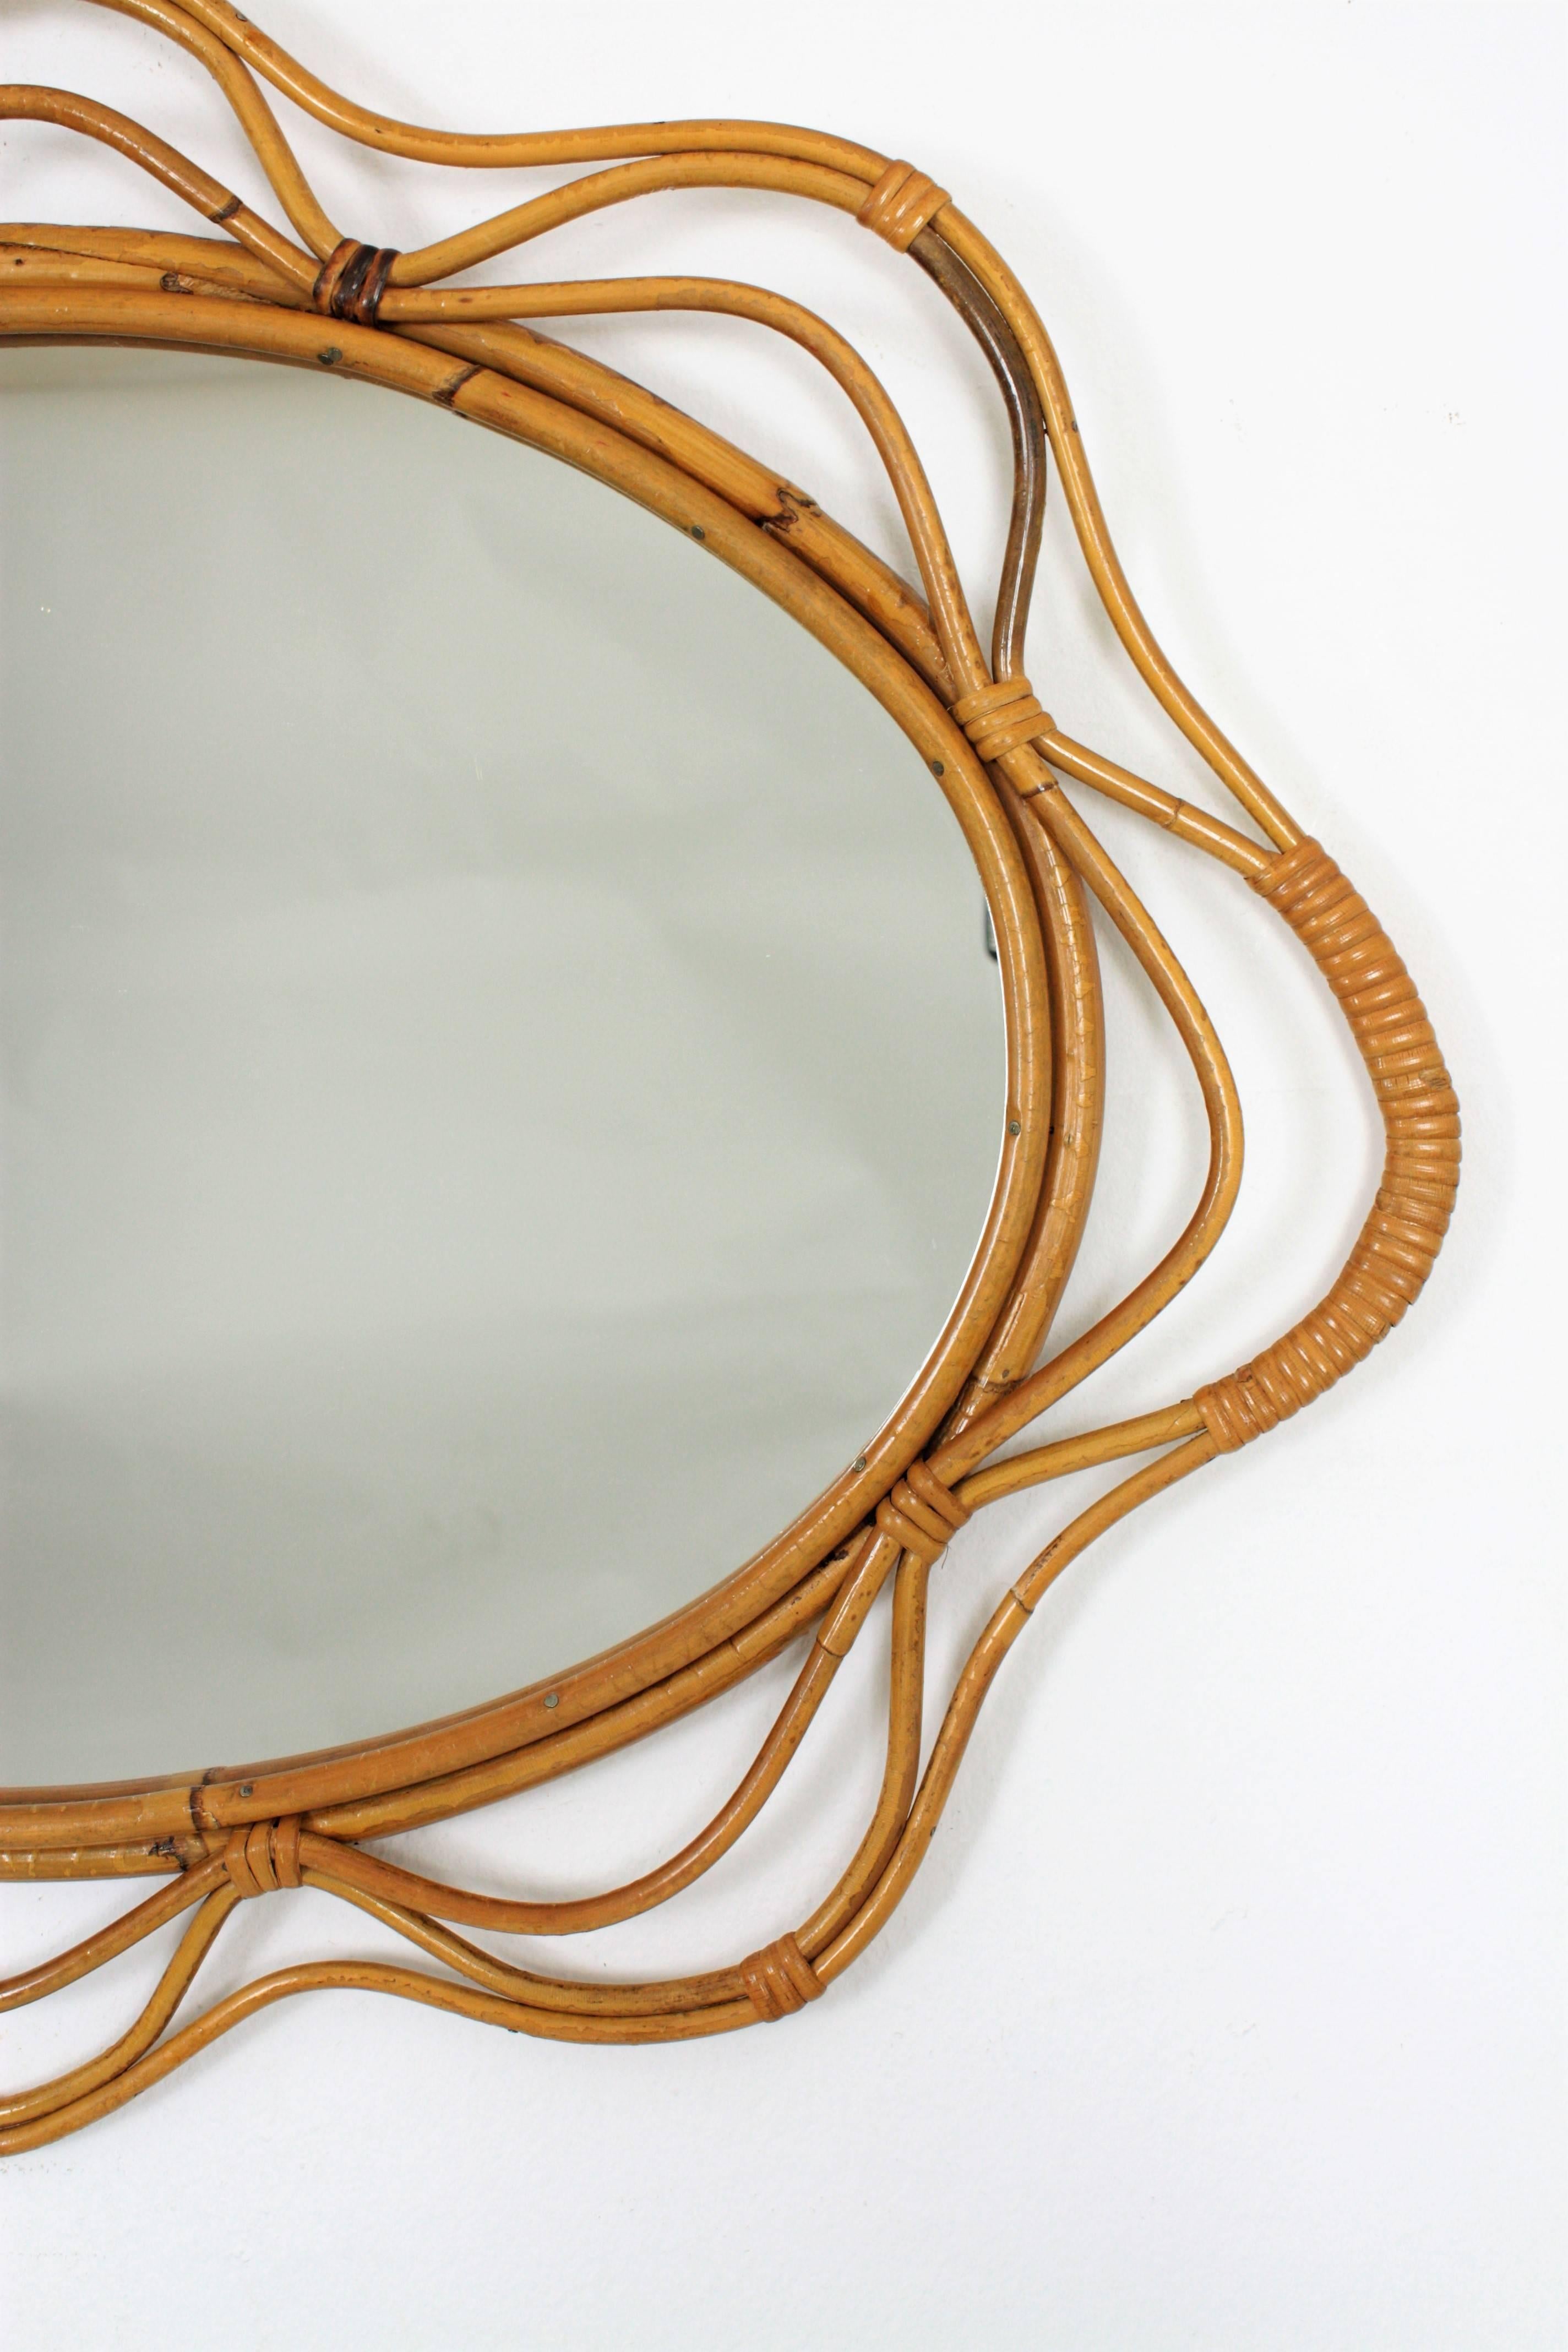 Hand-Crafted Unusual Spanish 1950s Hand-crafted Rattan and Bamboo Wavy Decorative Mirror